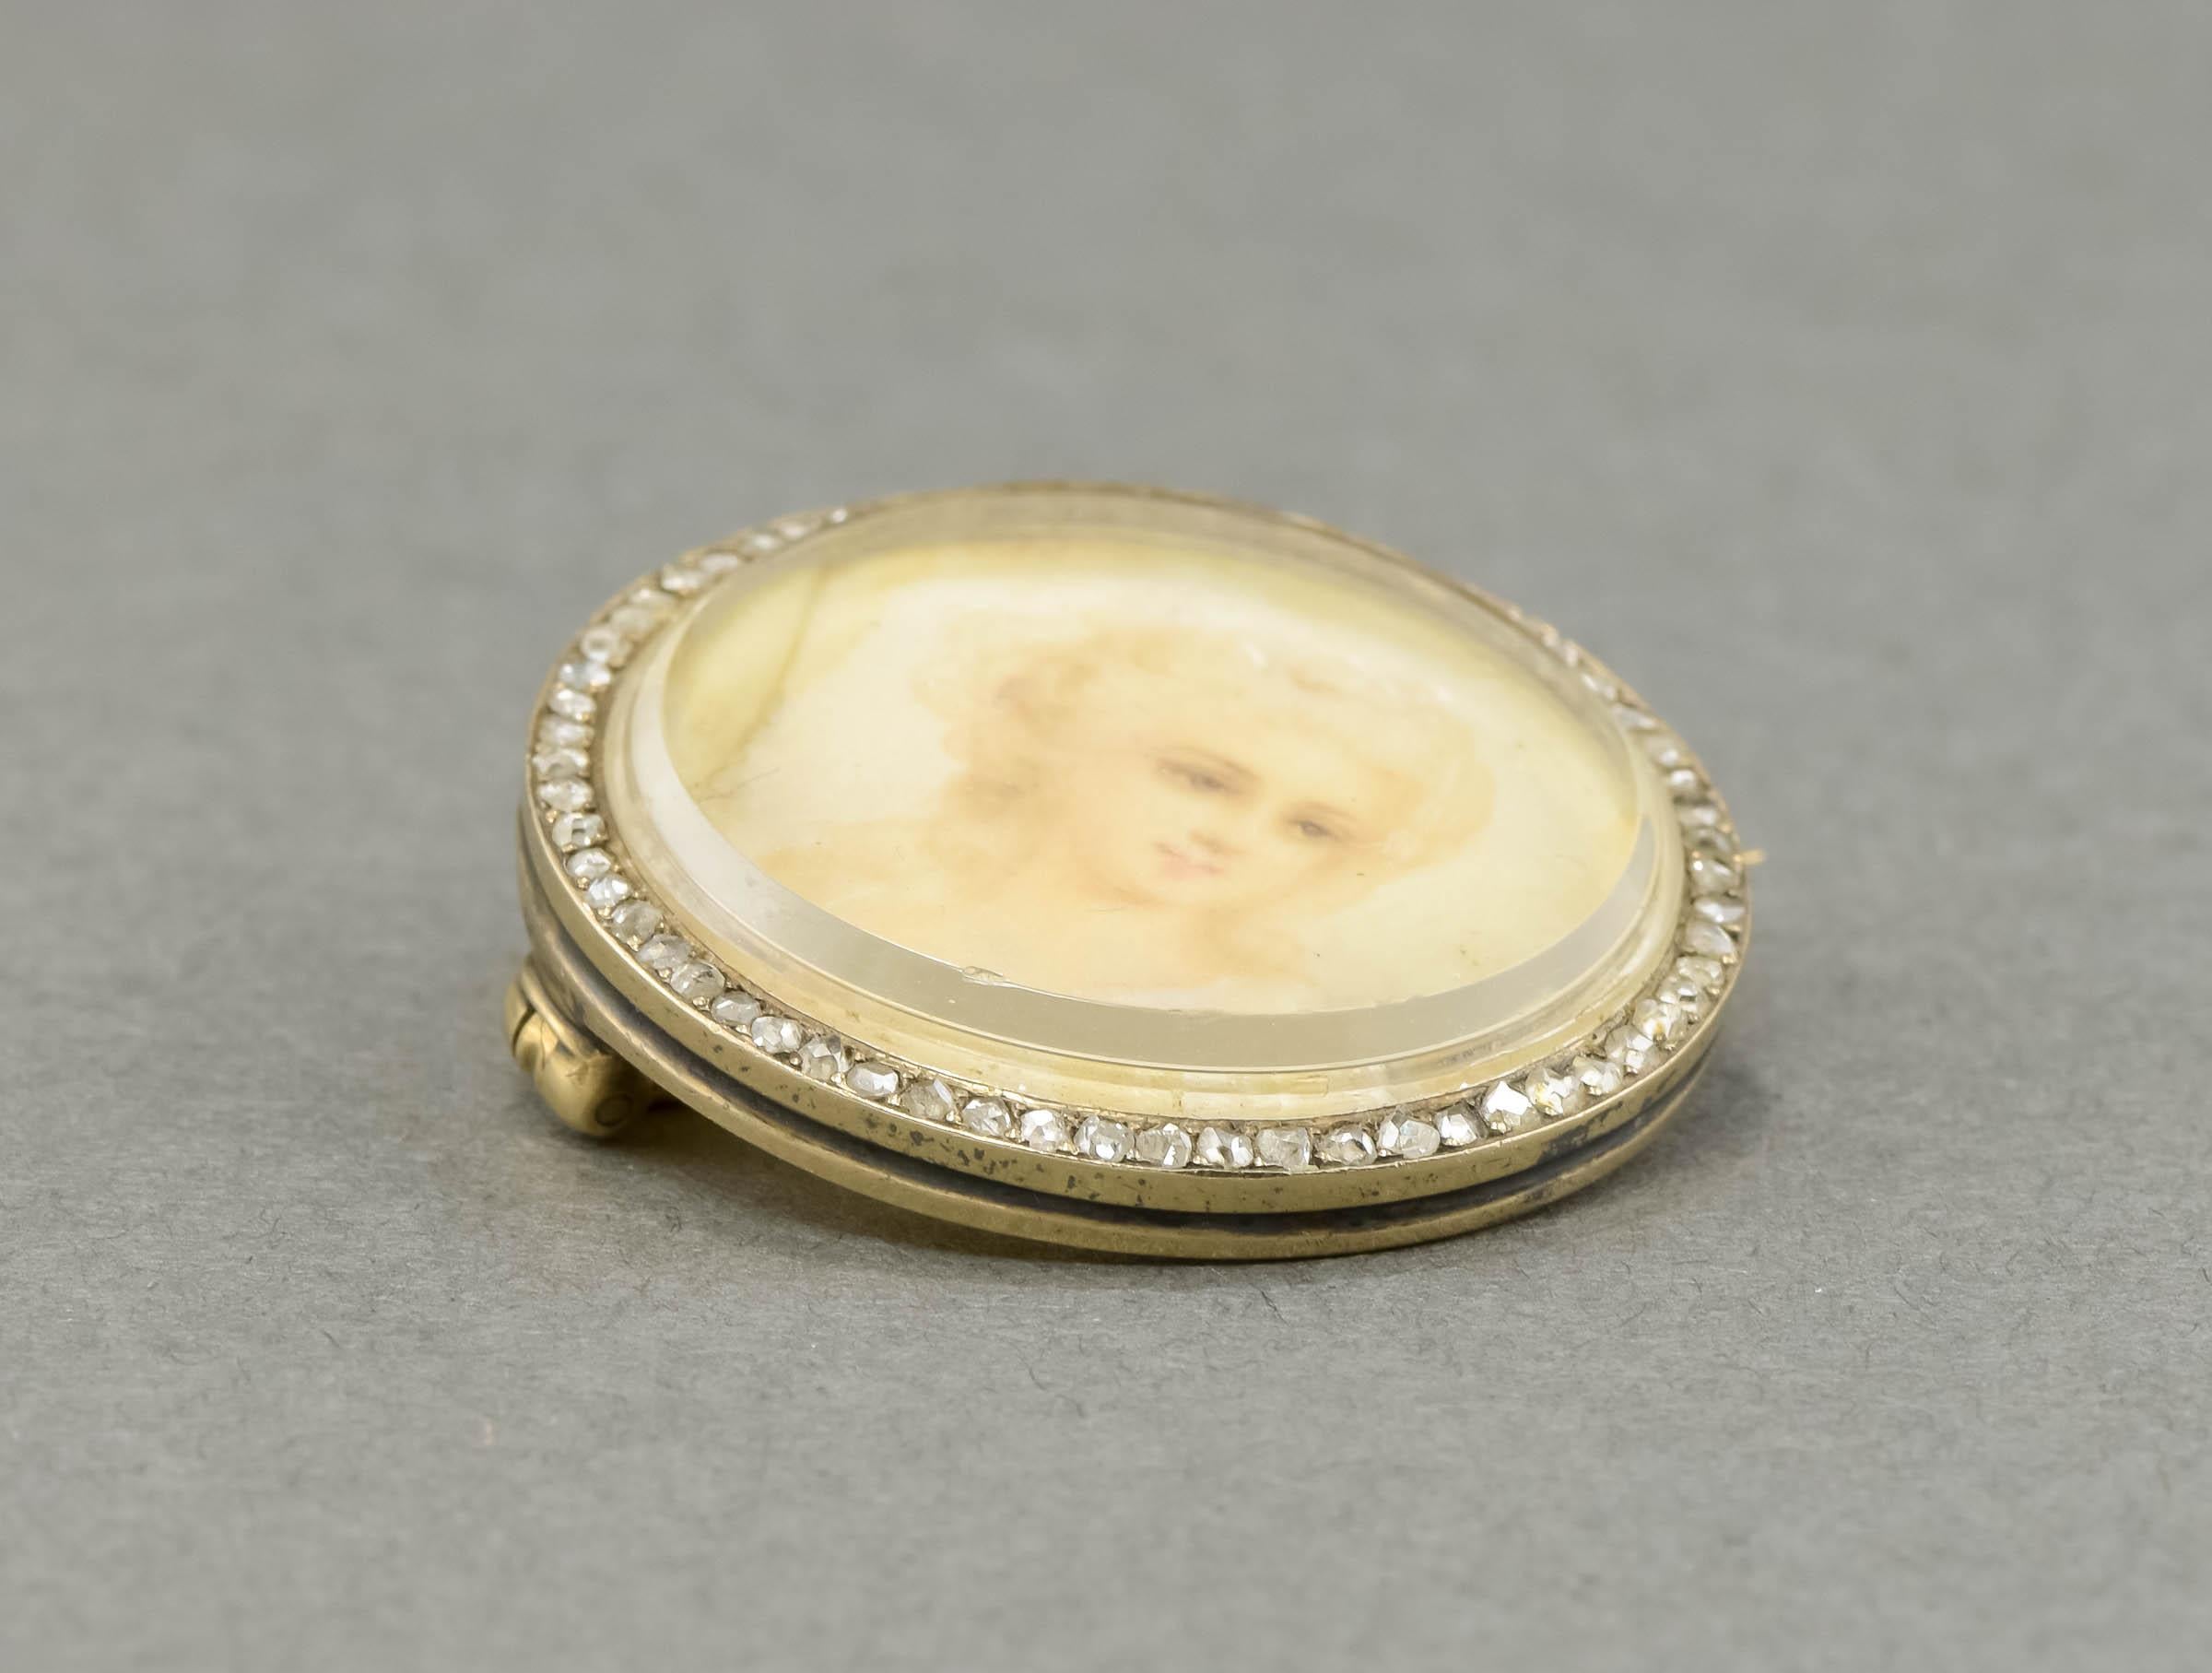 Antique Hand Painted Portrait Miniature Gold Brooch with Rose Cut Diamond Border For Sale 3